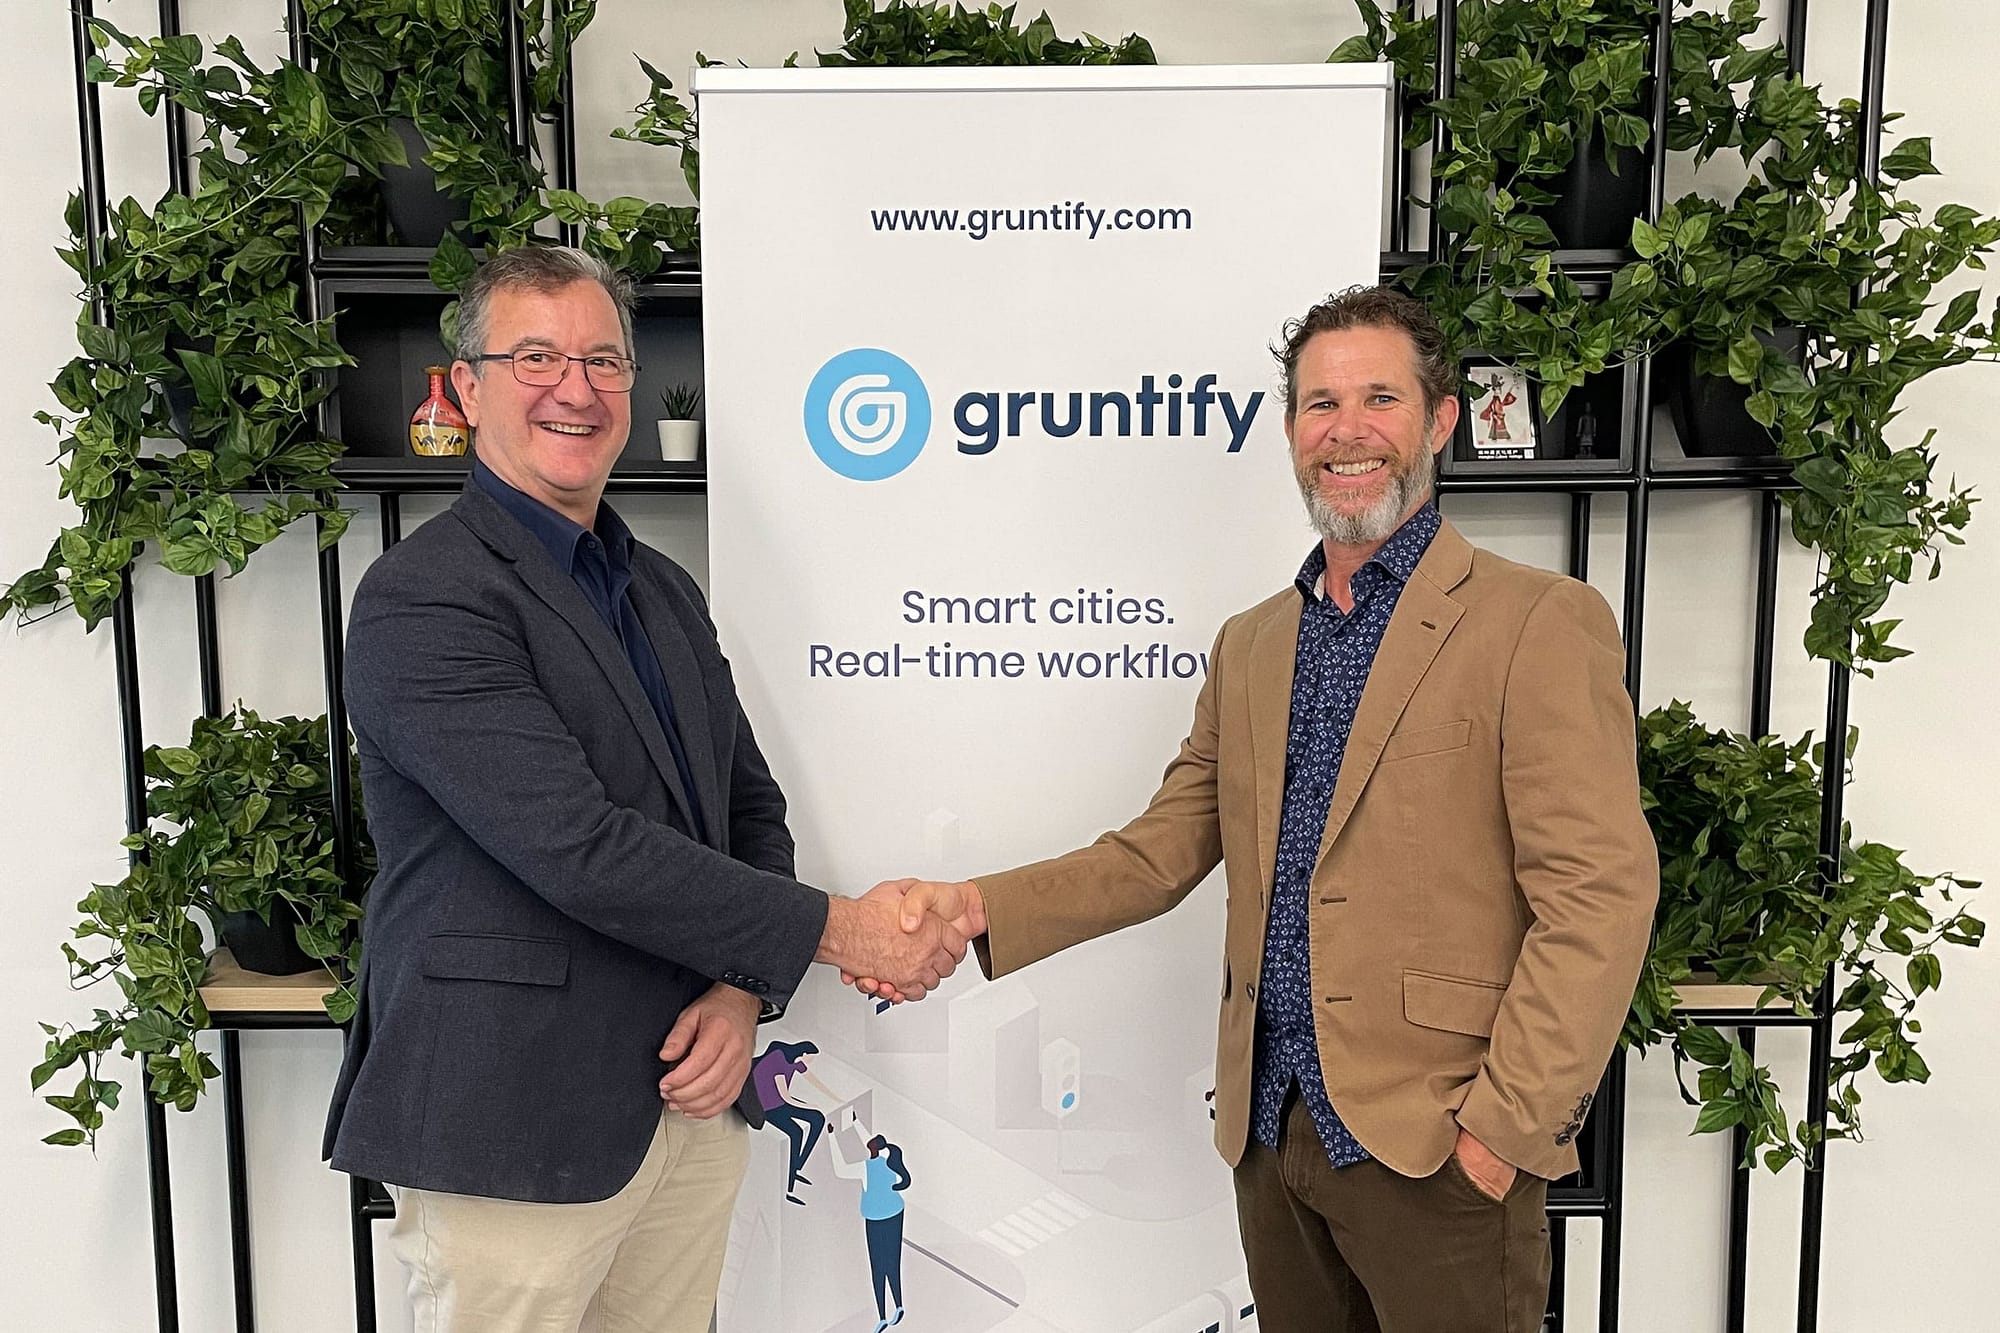 gruntify hc solutions partners shaking hands